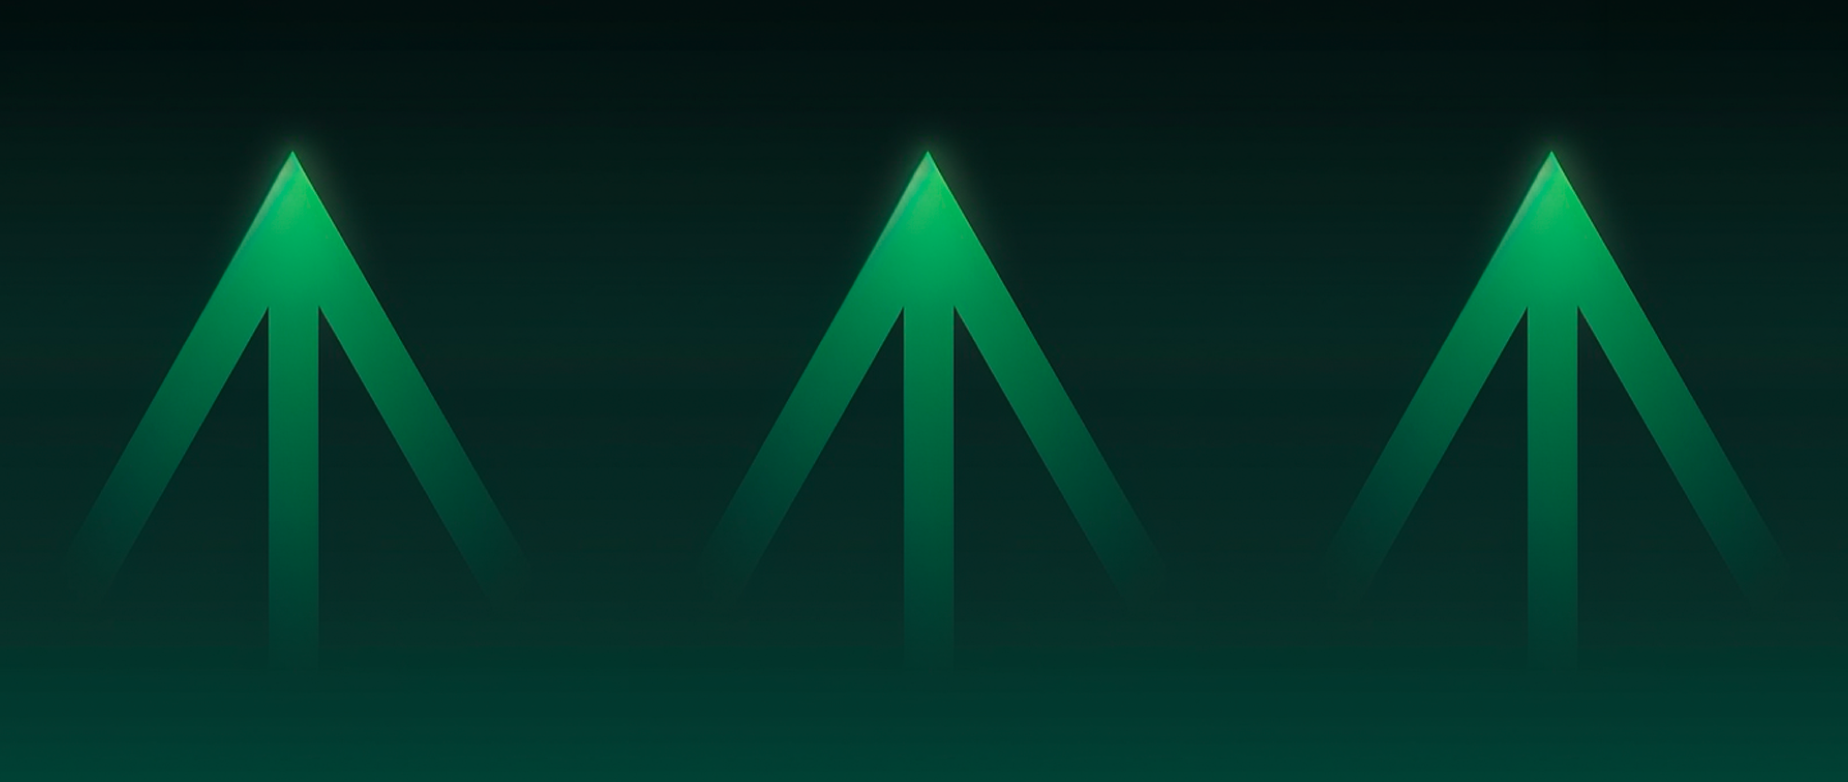 Three light green arrows pointing up on a dark green background.